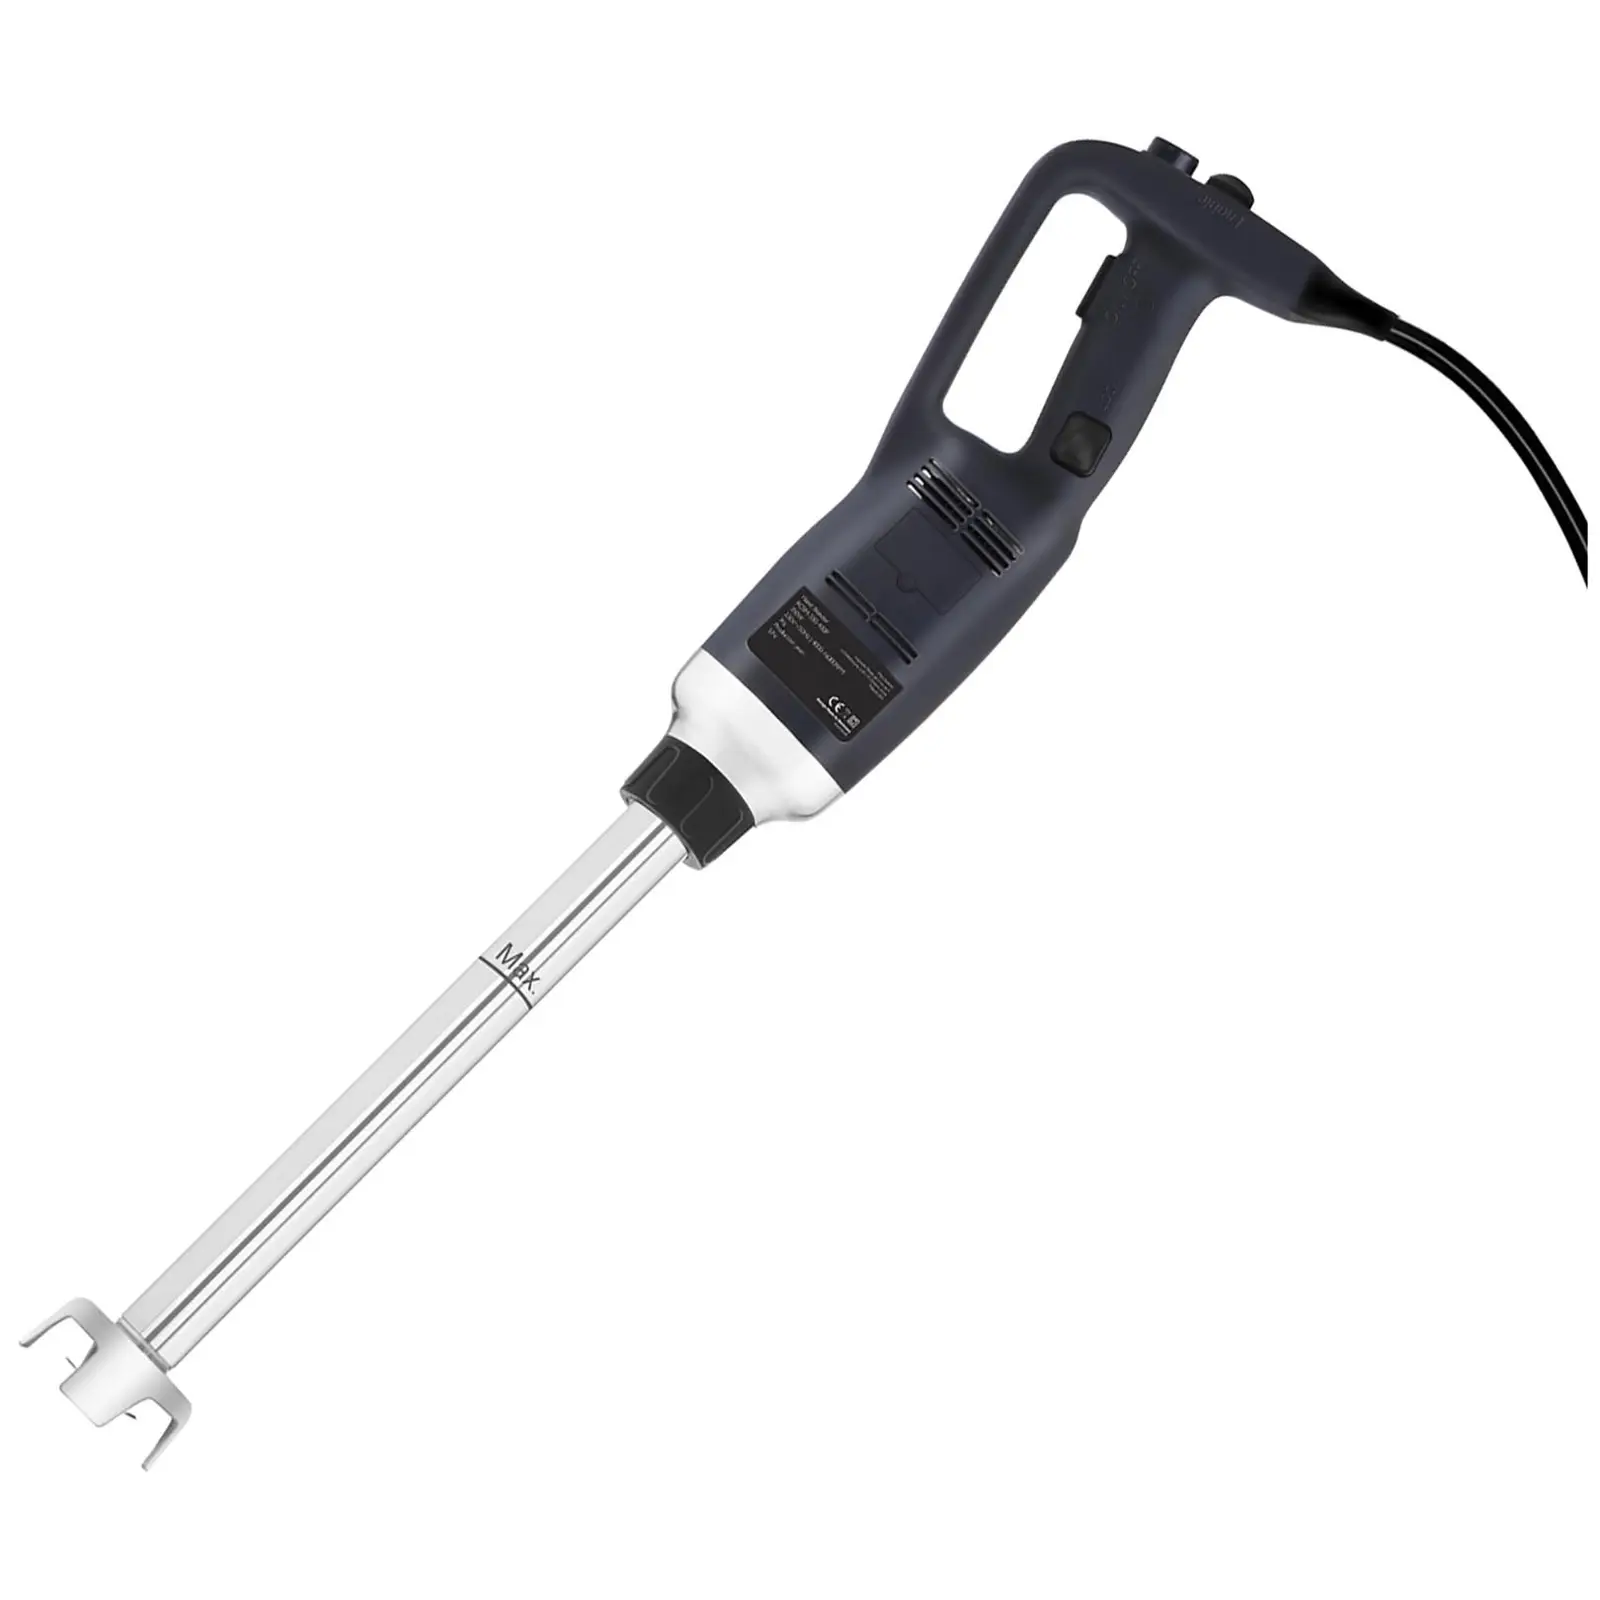 Hand blender - 350 W - 400 mm - 4,000 to 18,000 rpm - 2